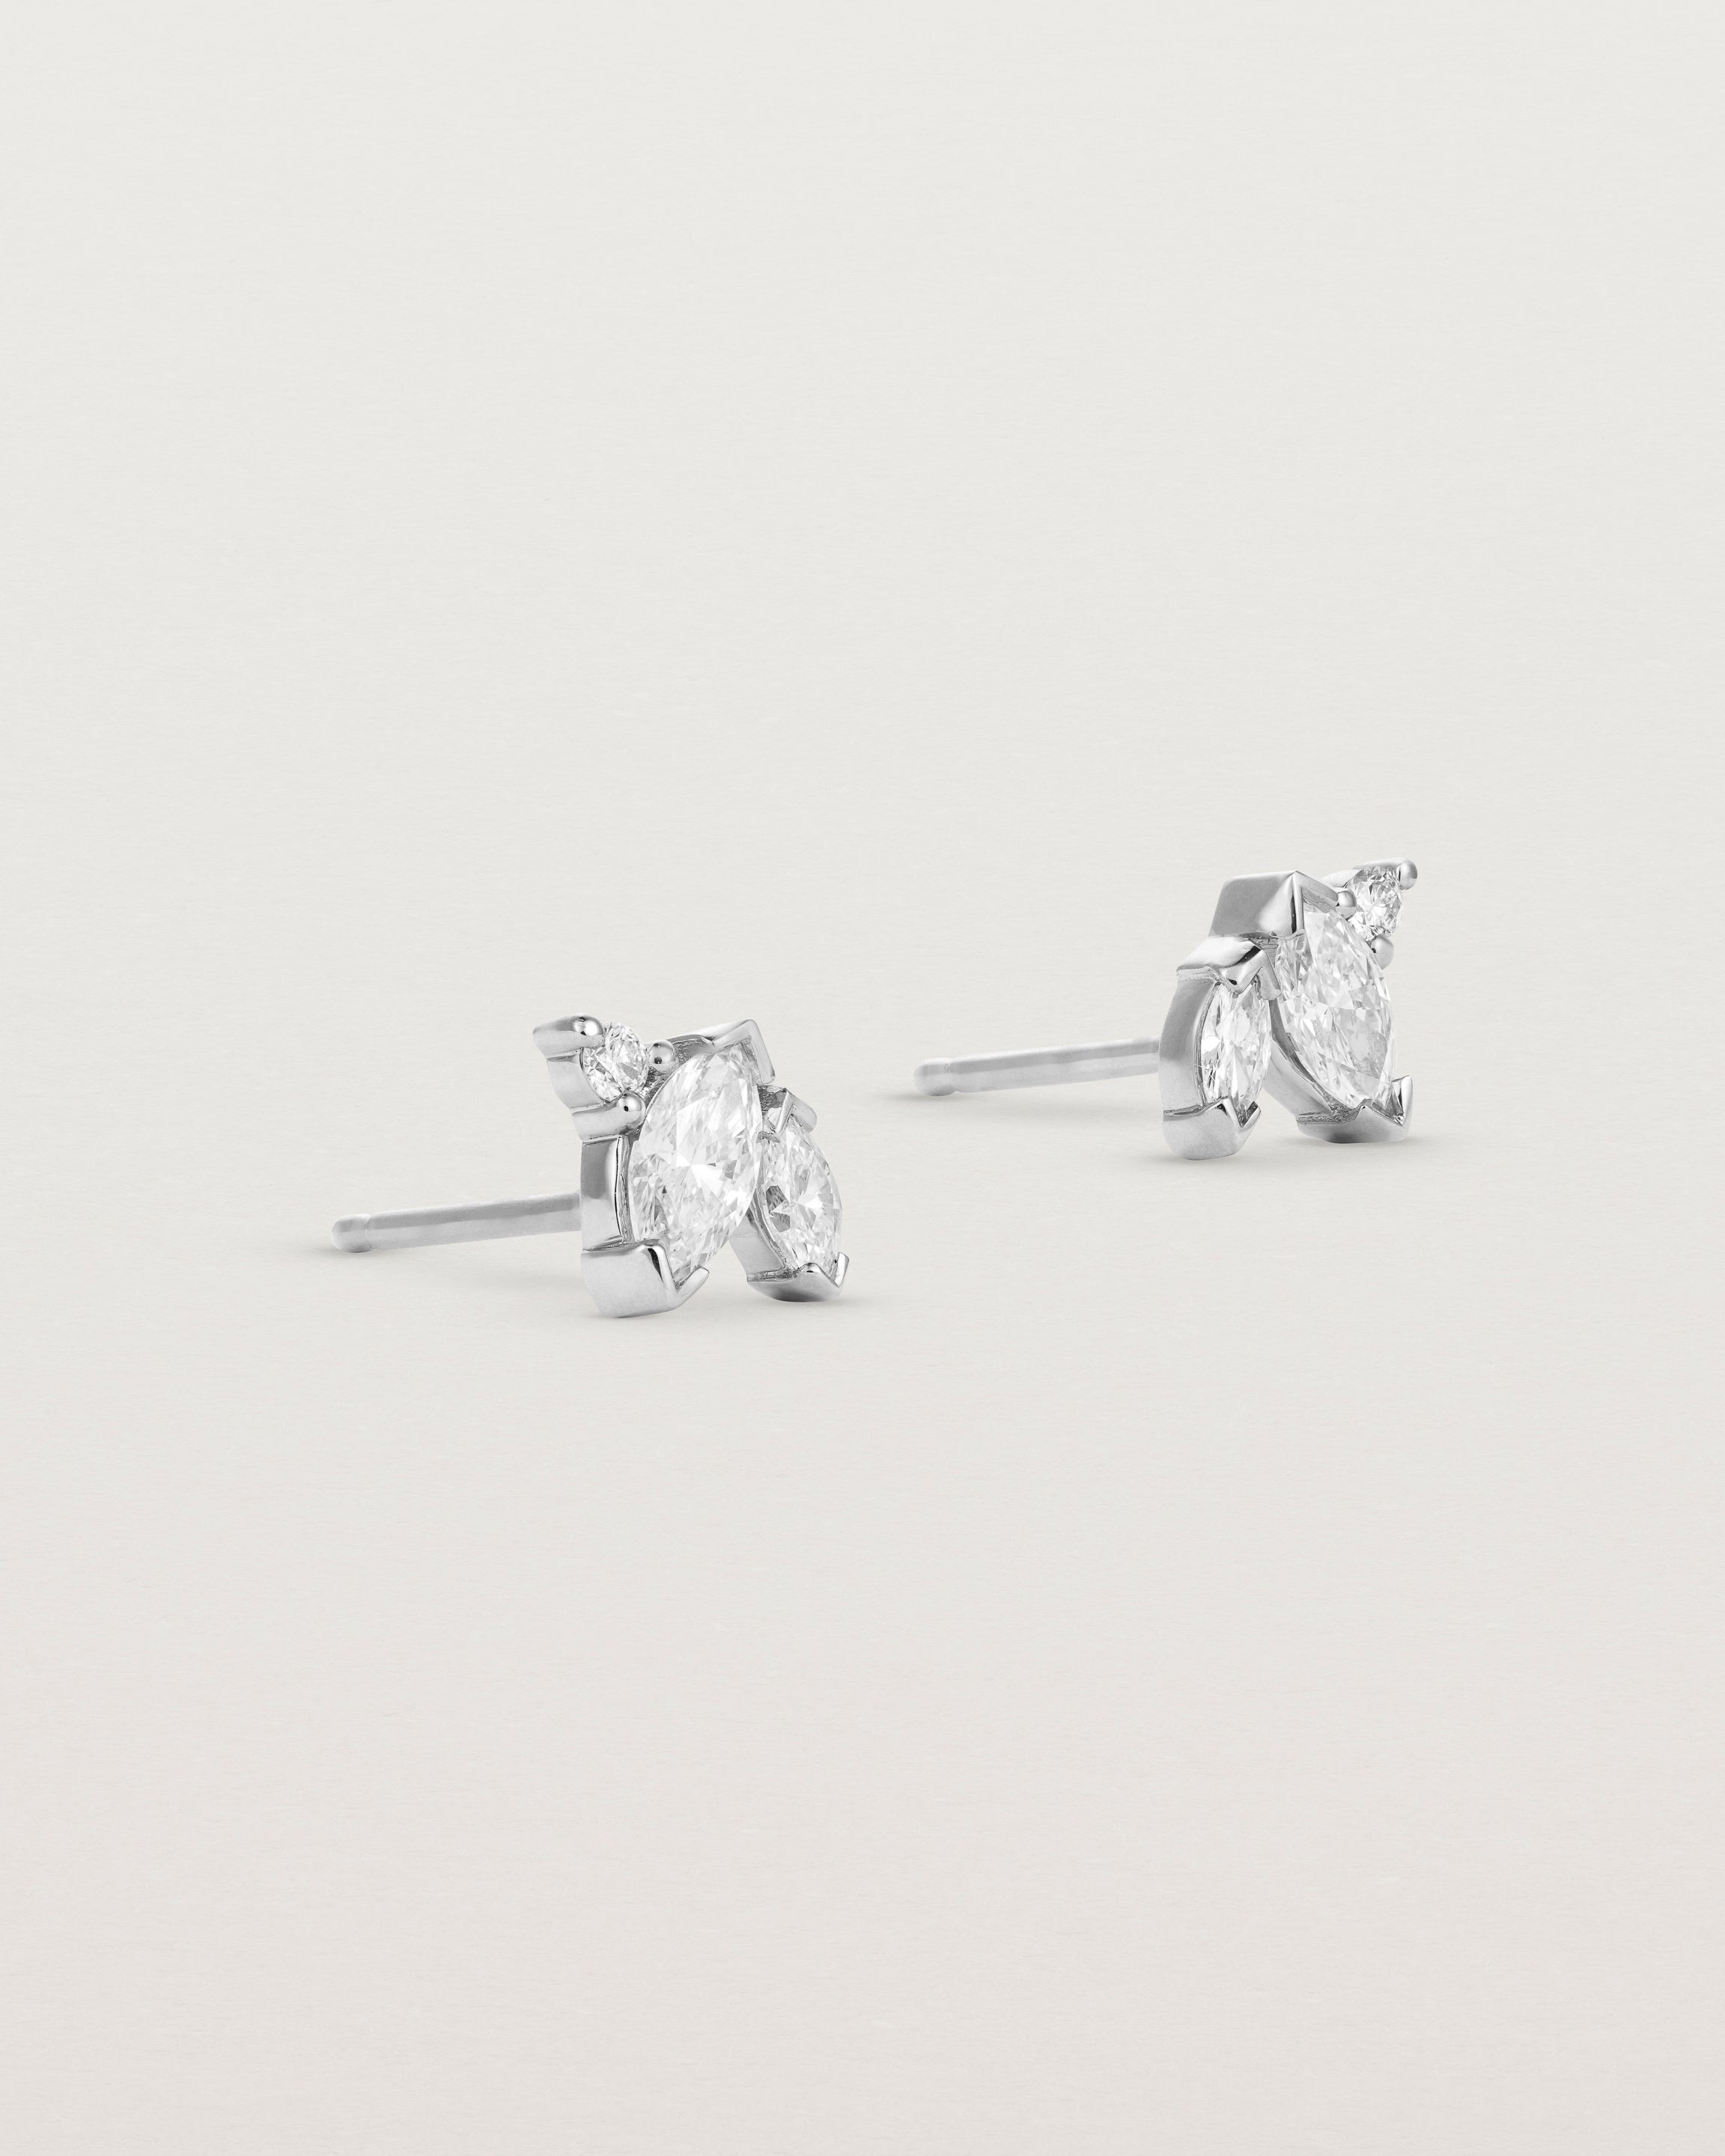 A pair of white gold studs featuring two marquise and one round diamond